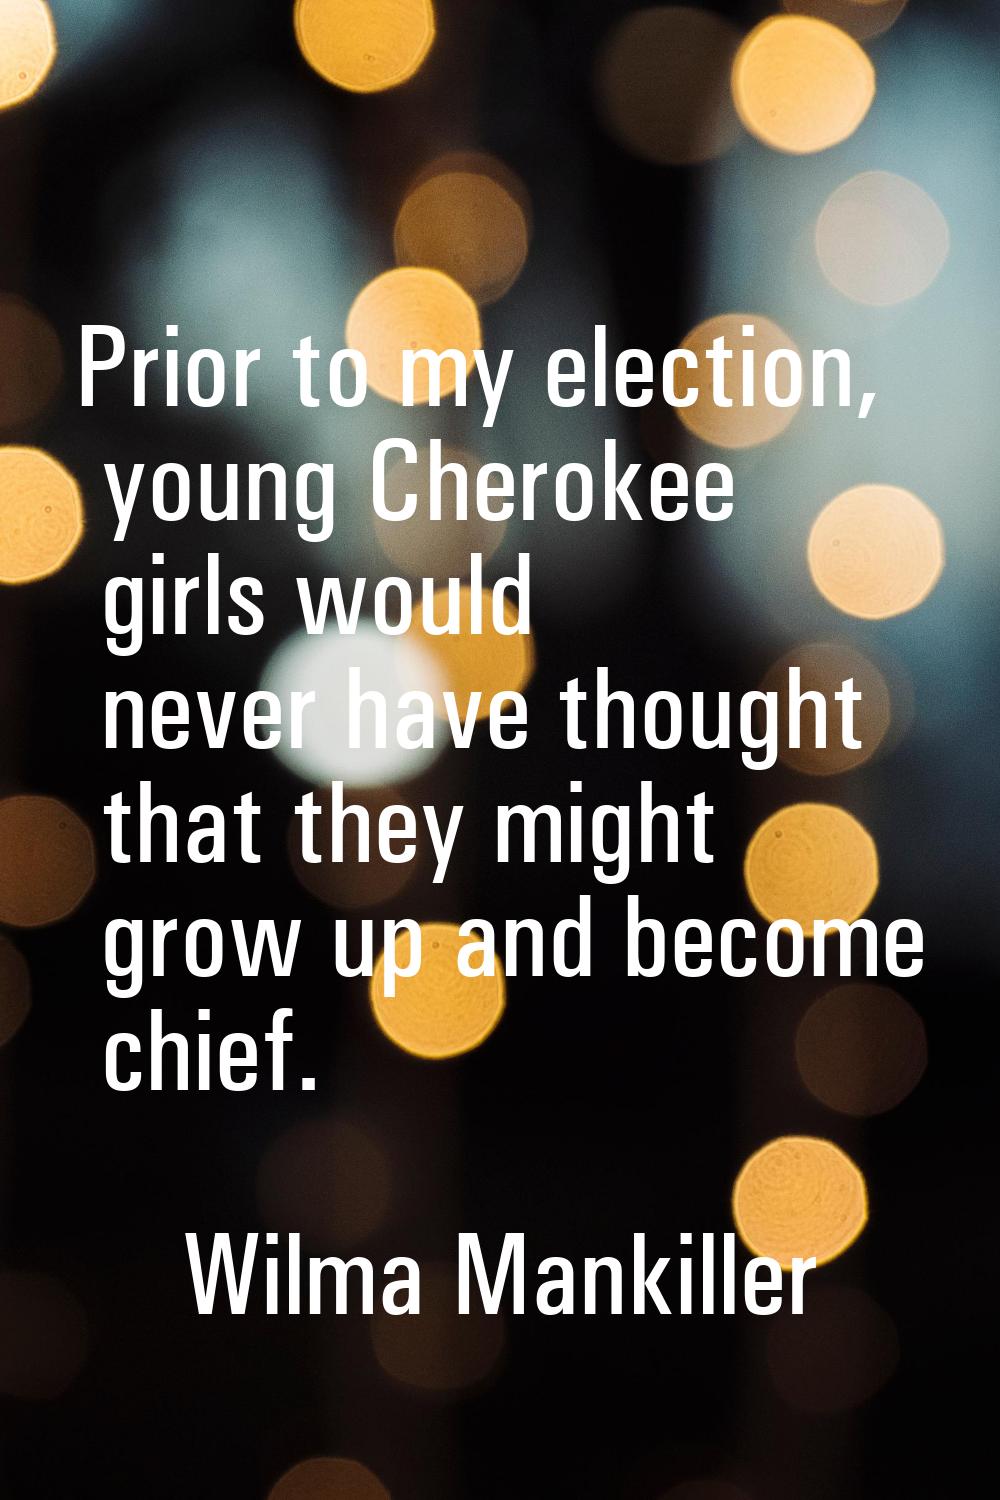 Prior to my election, young Cherokee girls would never have thought that they might grow up and bec